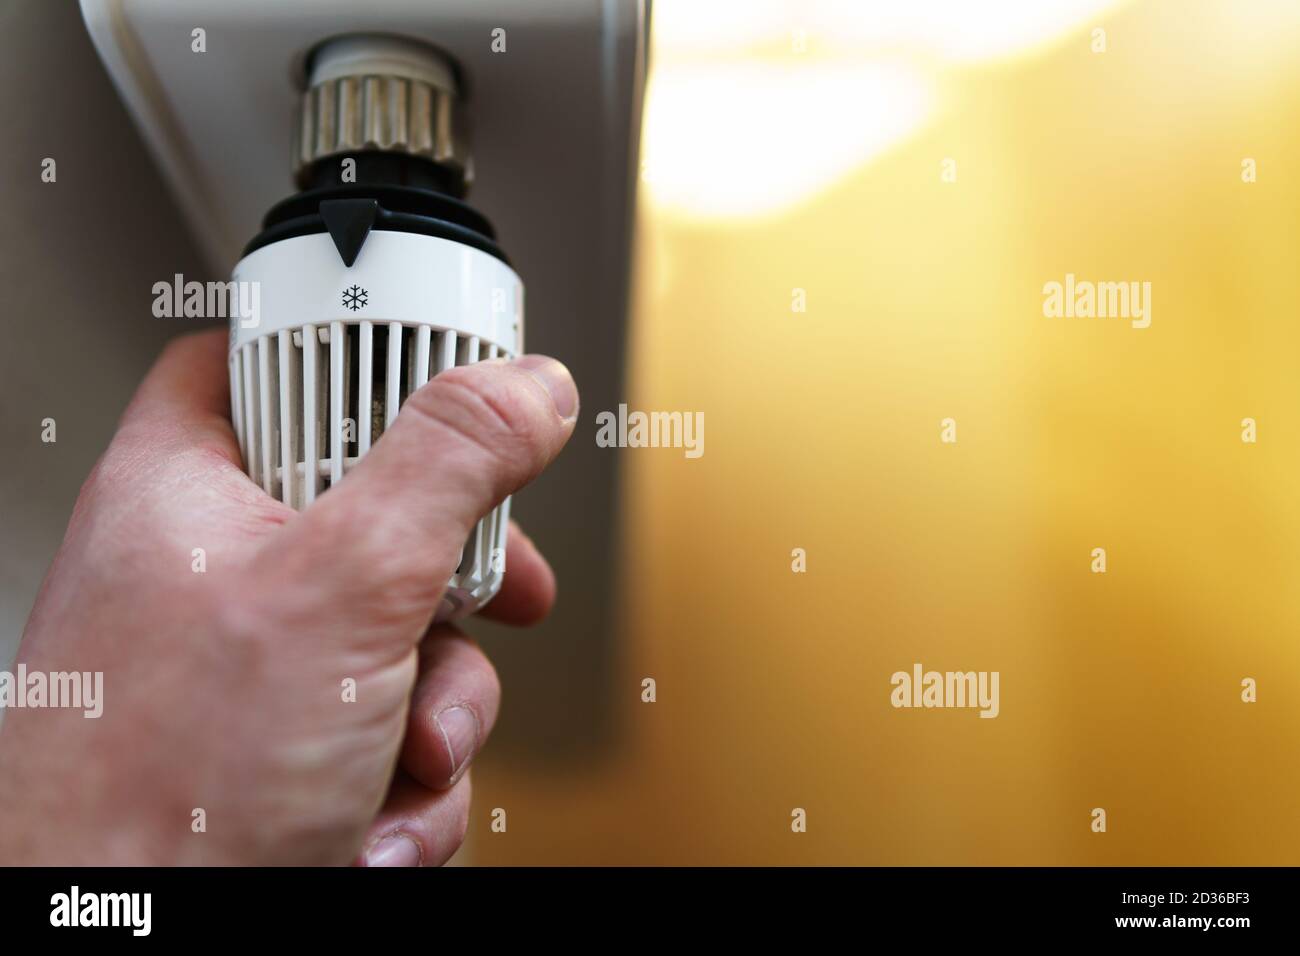 Hand of man adjusting radiator thermostat valve to snow flake frost icon, symbol for saving money at heating costs or low temperature, closeup. Stock Photo